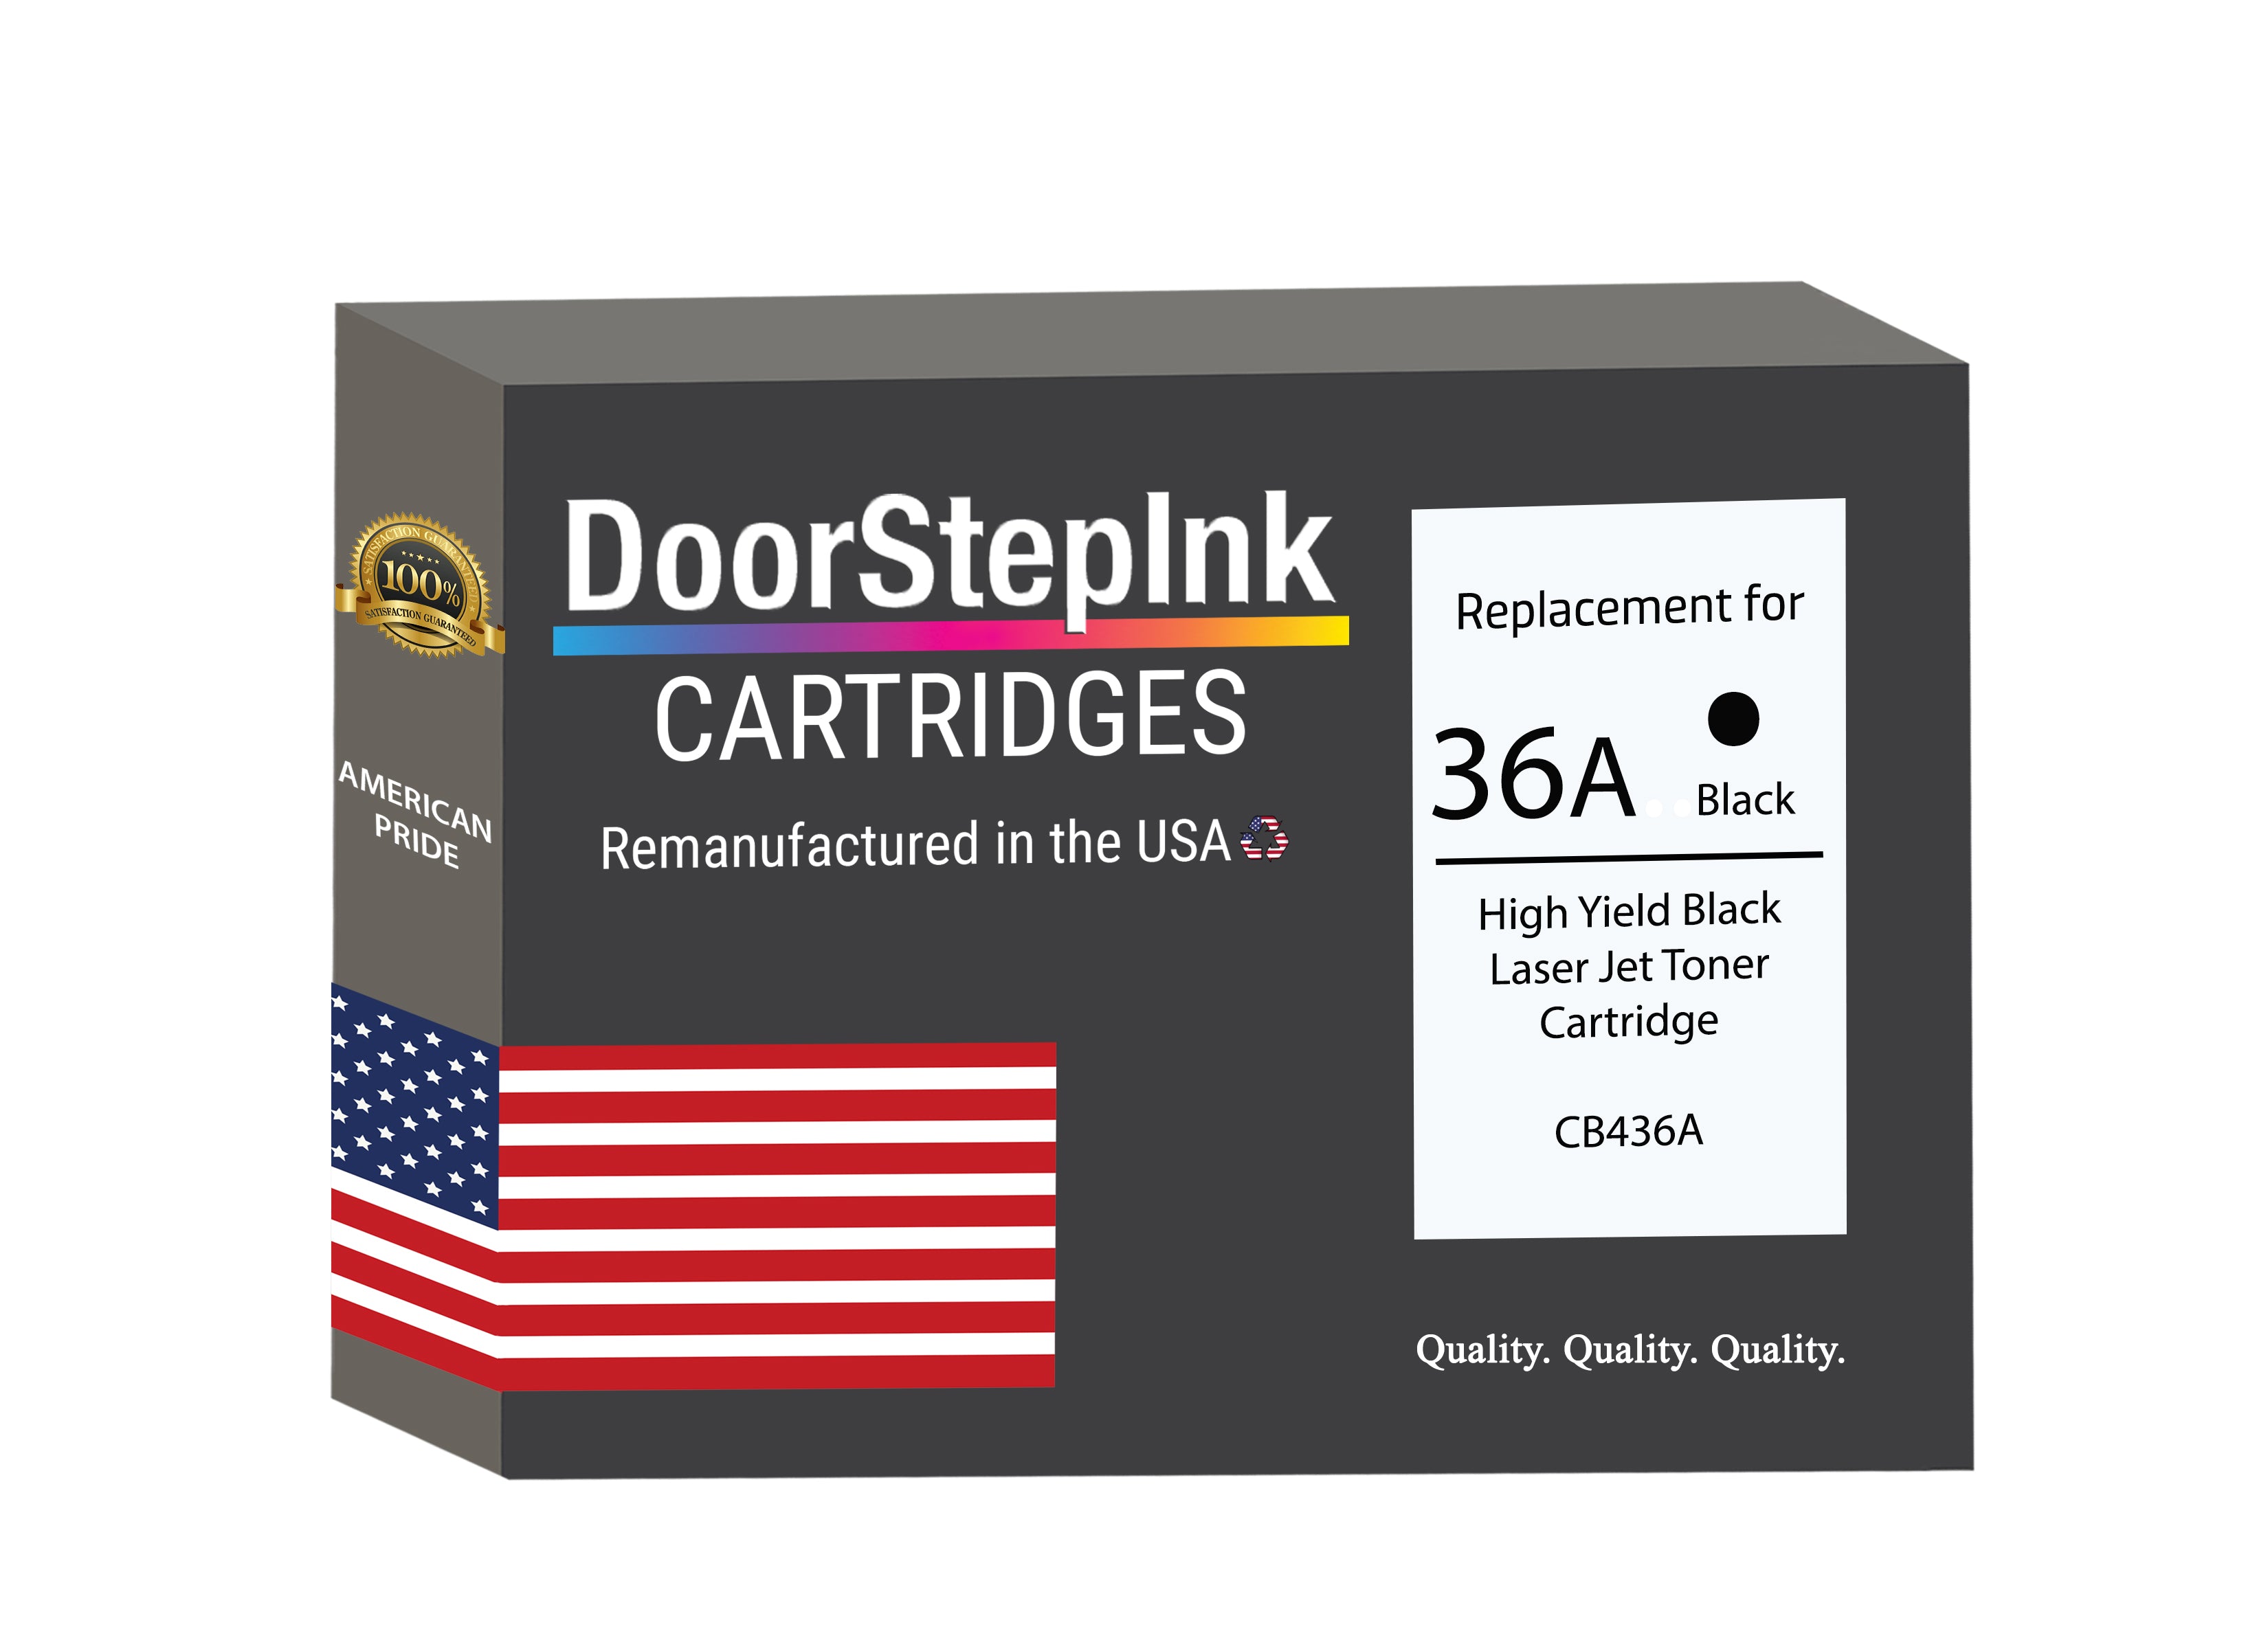 shipbuilding Far away Discovery DoorStepInk Remanufactured in the USA For HP 36A High Yield Black Lase